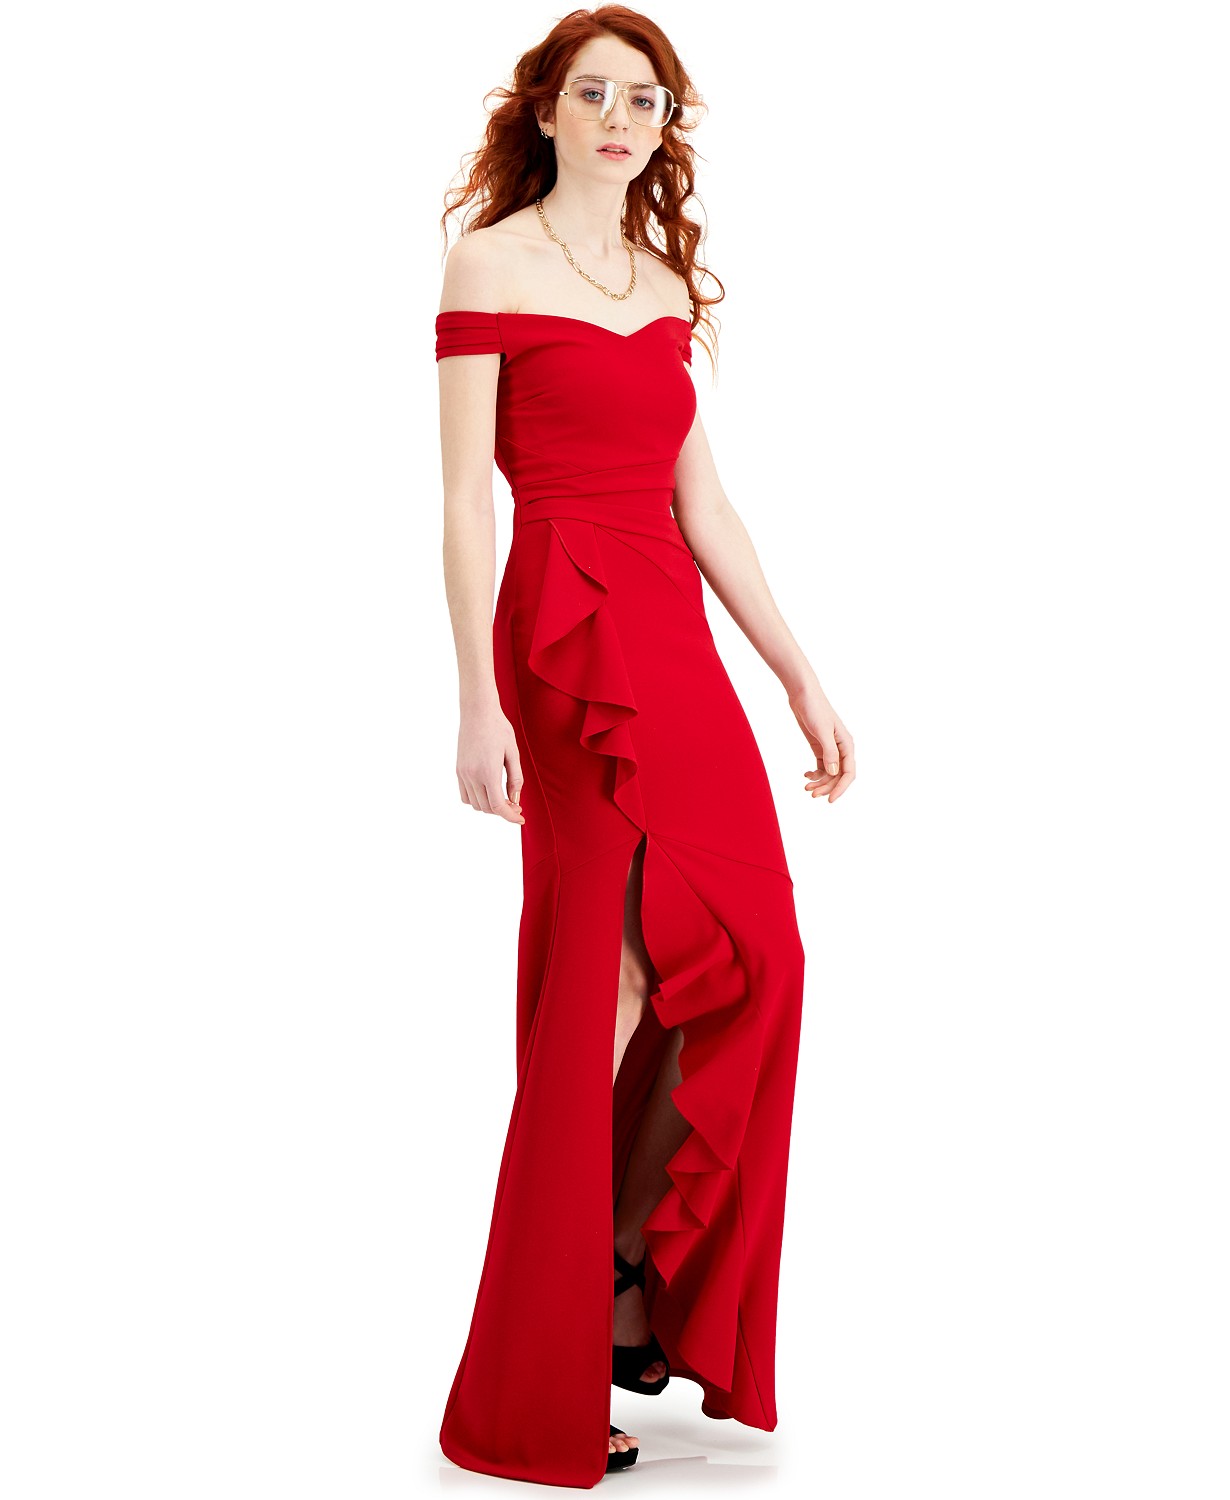 Macy's prom Off the shoulder Ruffled slit Gown Red color